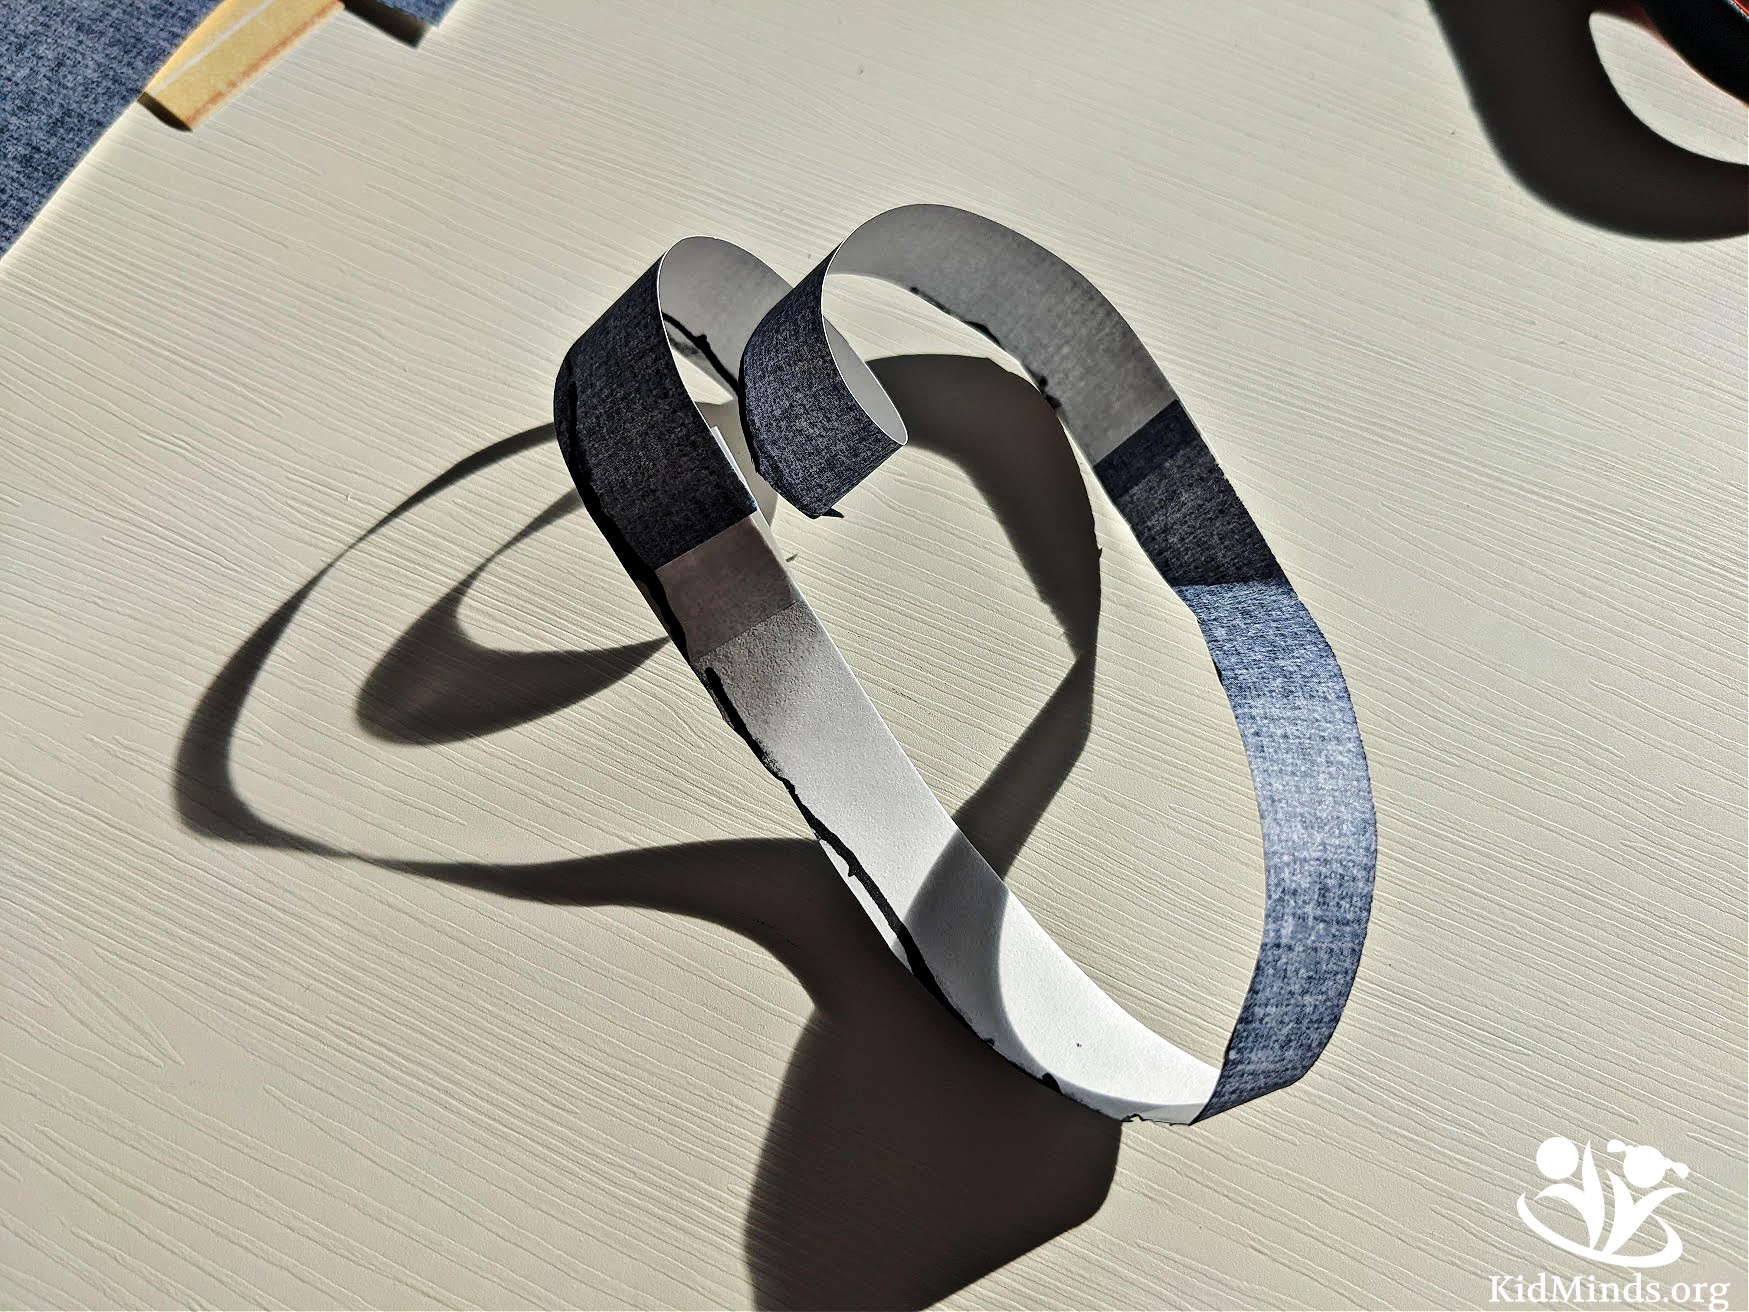 The Mobius strip is one of my favorite science-y math activities. It’s inexpensive to make, packed with educational value, and super exciting. #kidsactivities #mobiusstrip #handsonlearning #funwithmath